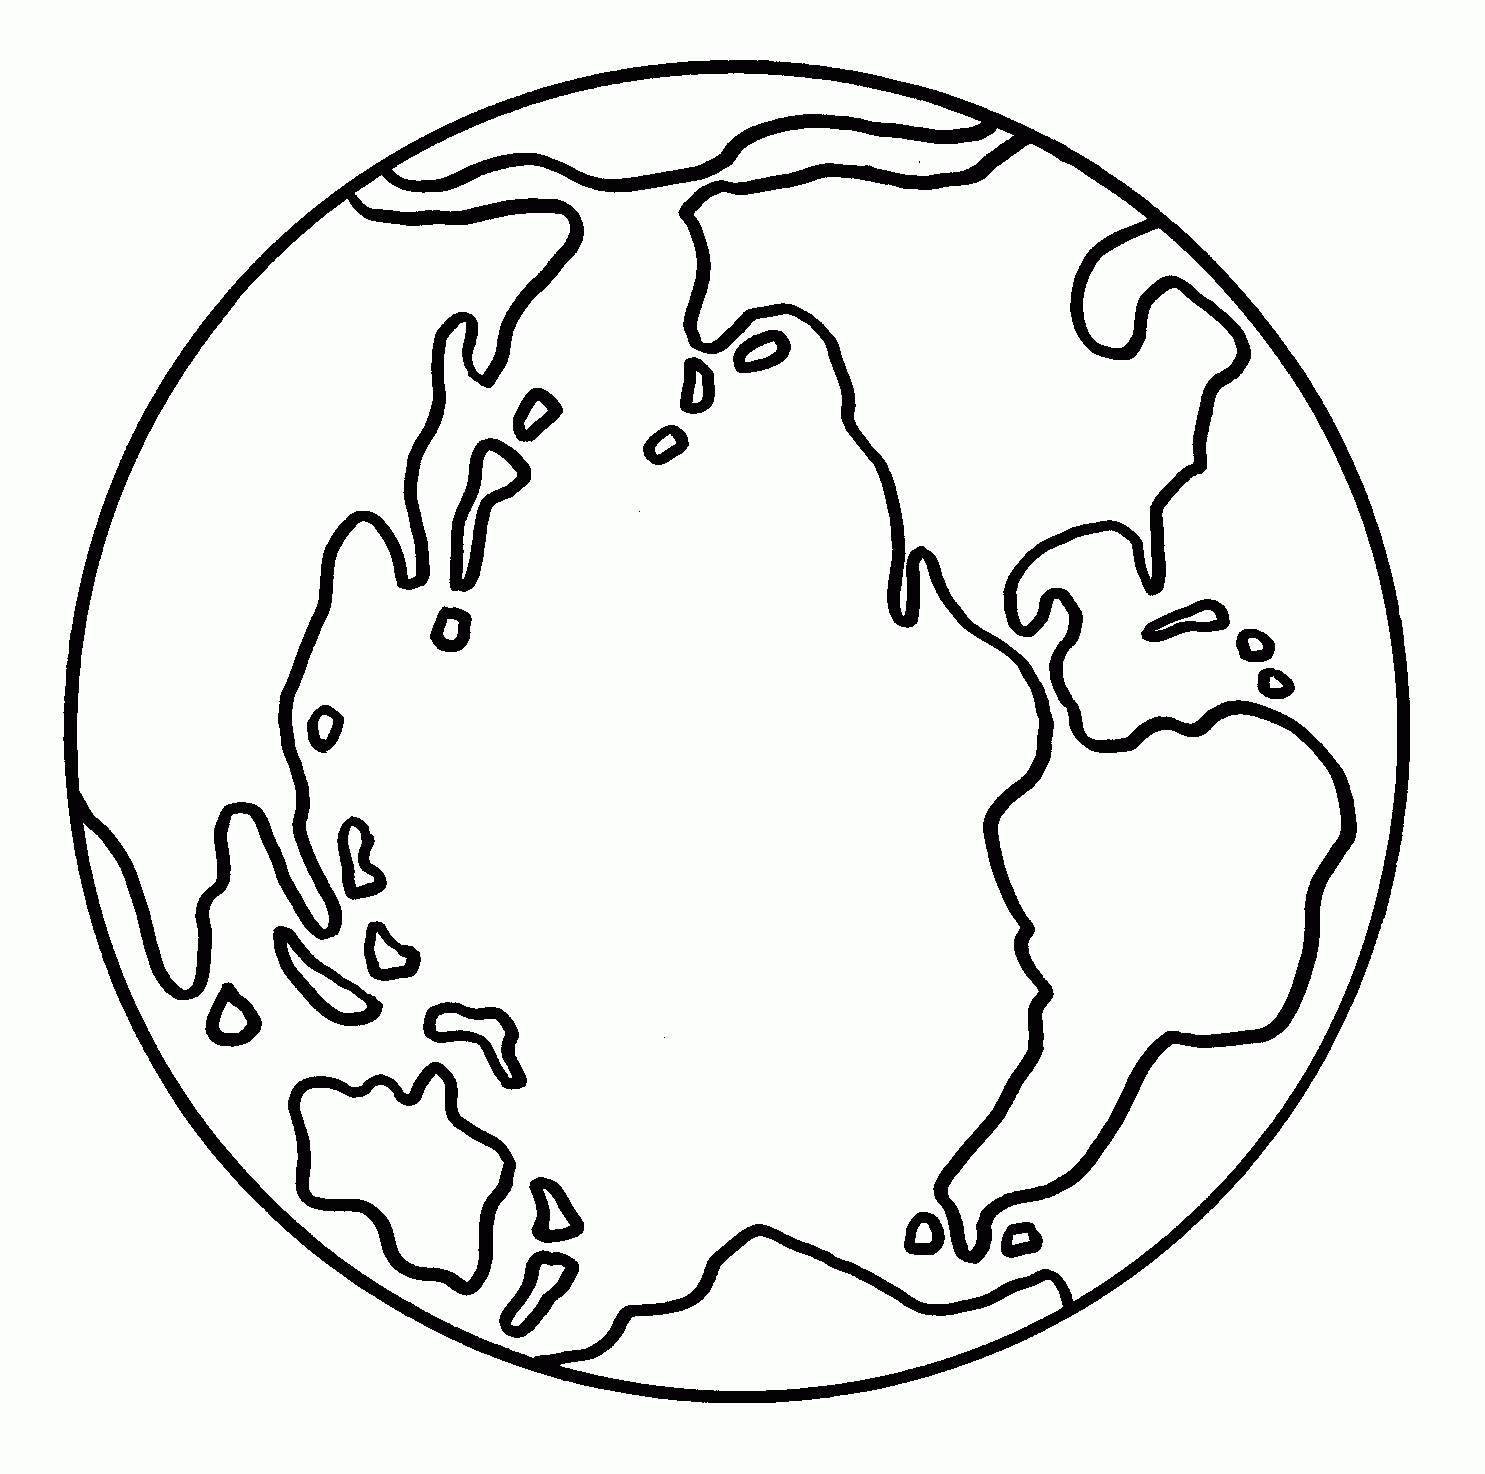 Earth Template Printable Coloringkids co ClipArt Best 